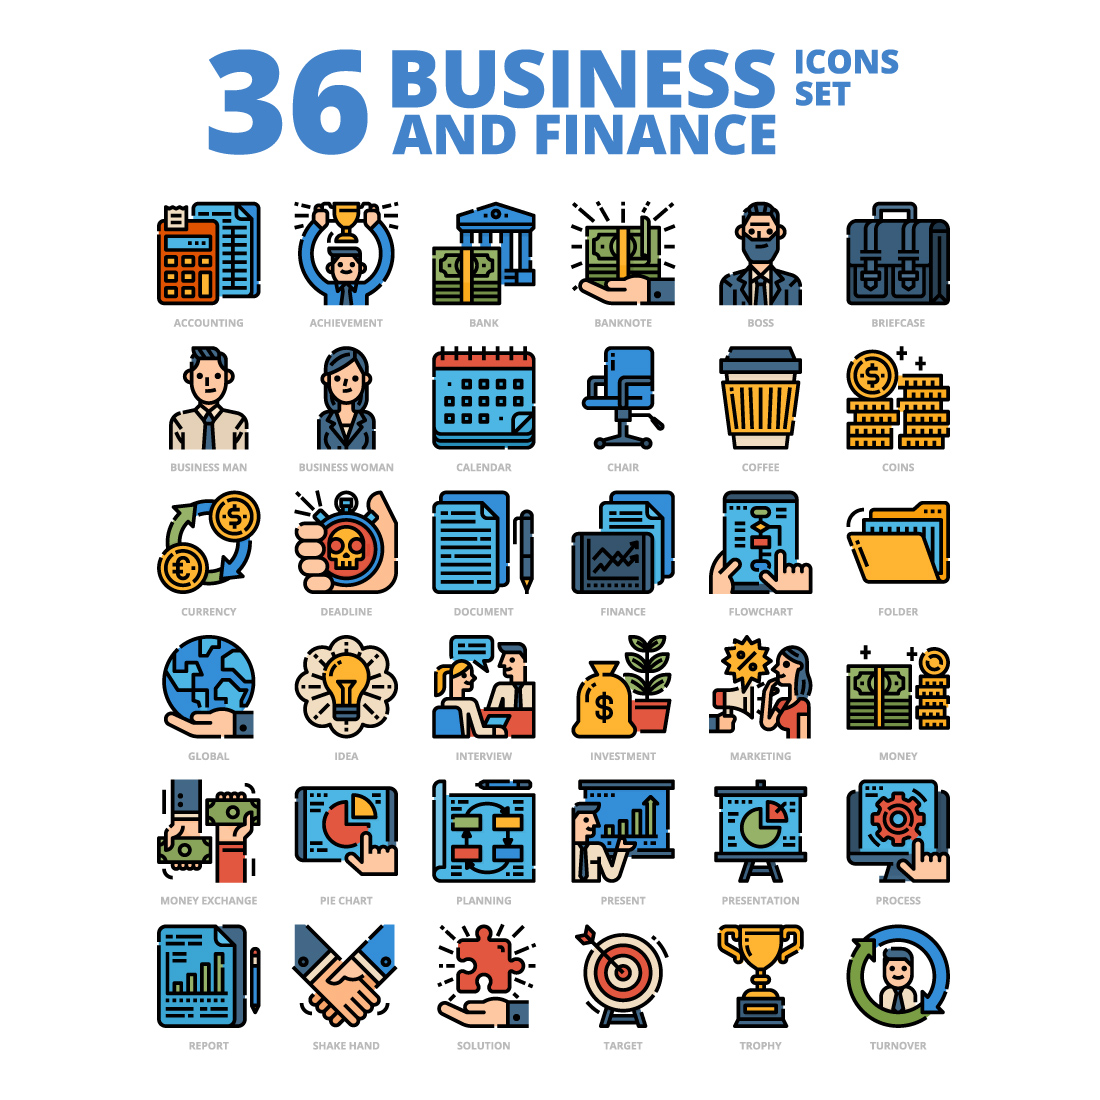 36 Business and Finance Icons Set x 4 Styles cover image.